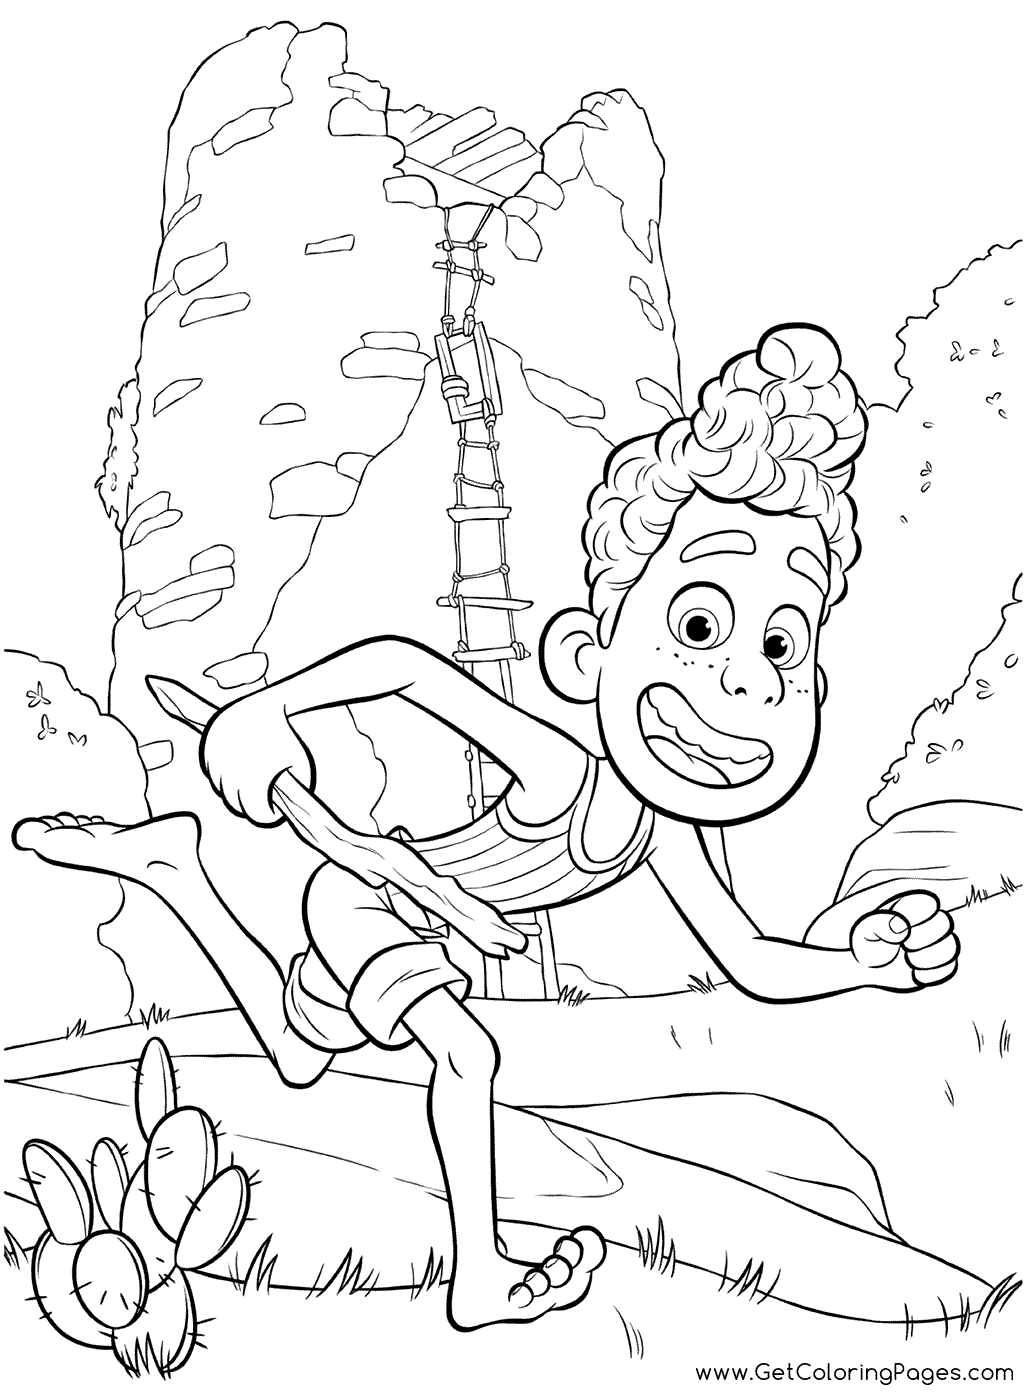 Alberto From Disney Pixar Coloring Pages